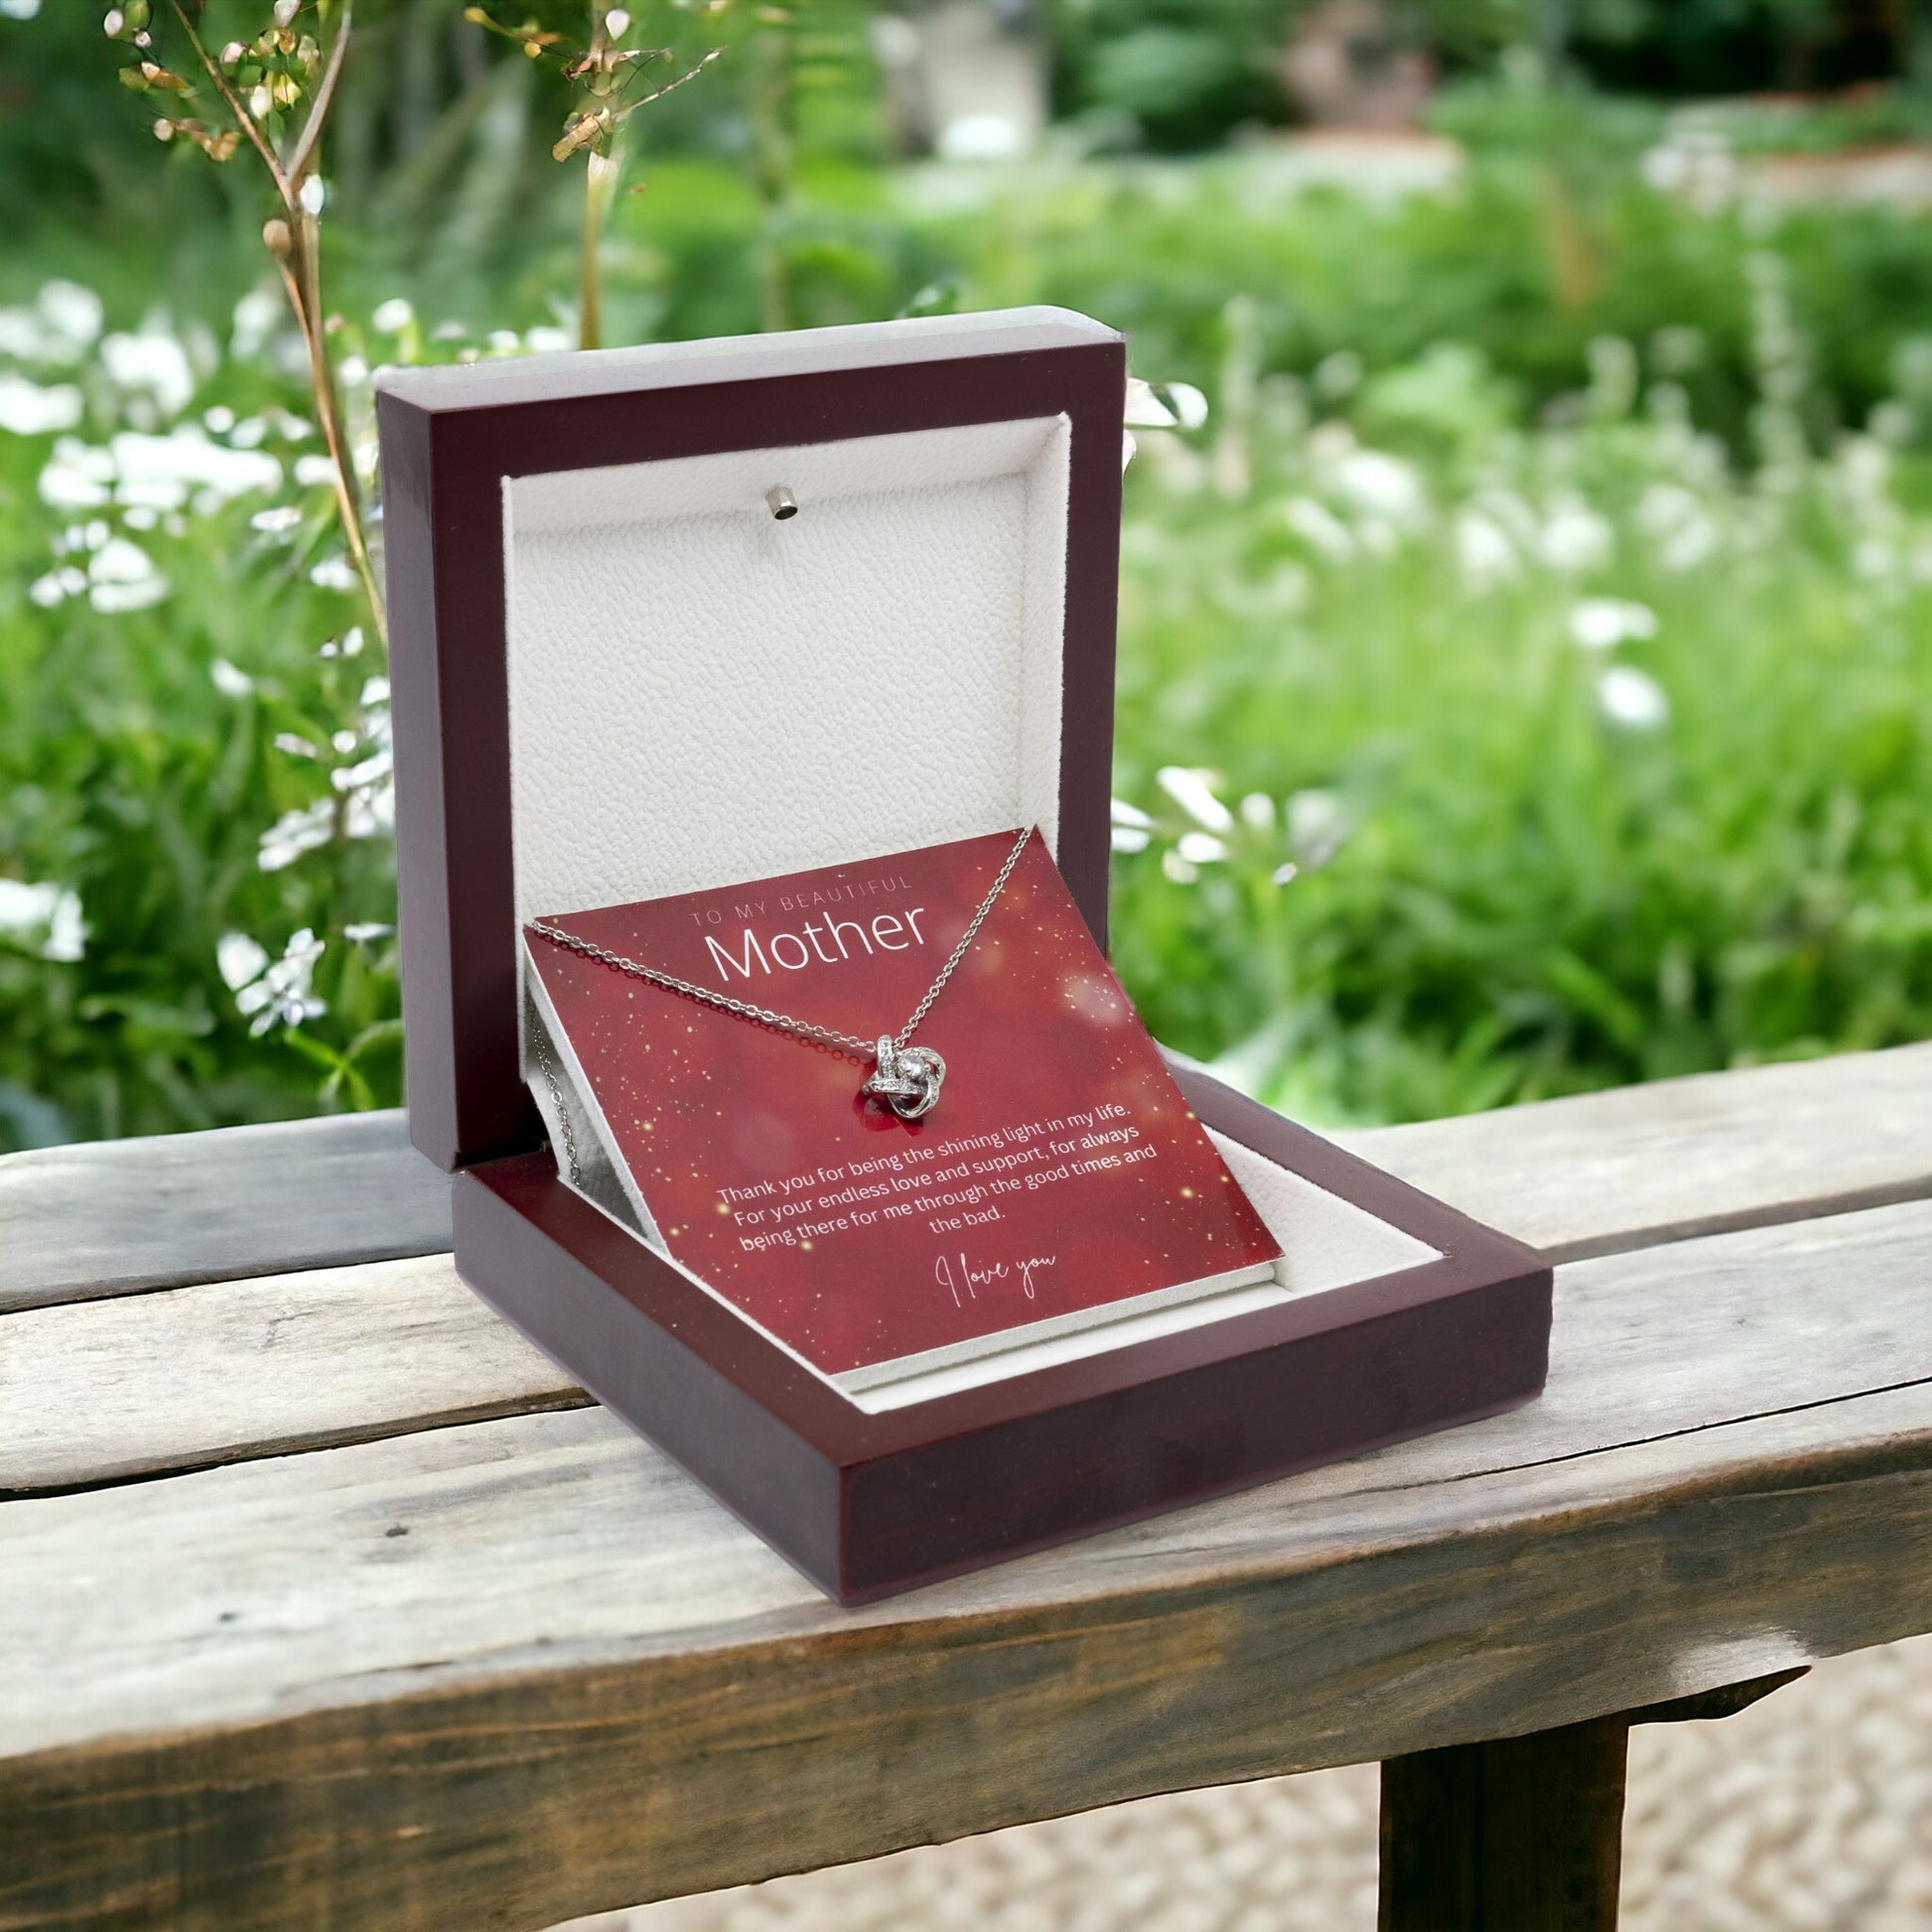 To My Beautiful Mother - Sterling Silver Necklace Personalised Gift With A Custom Message Card - Gift from Son / Daughter For Mum